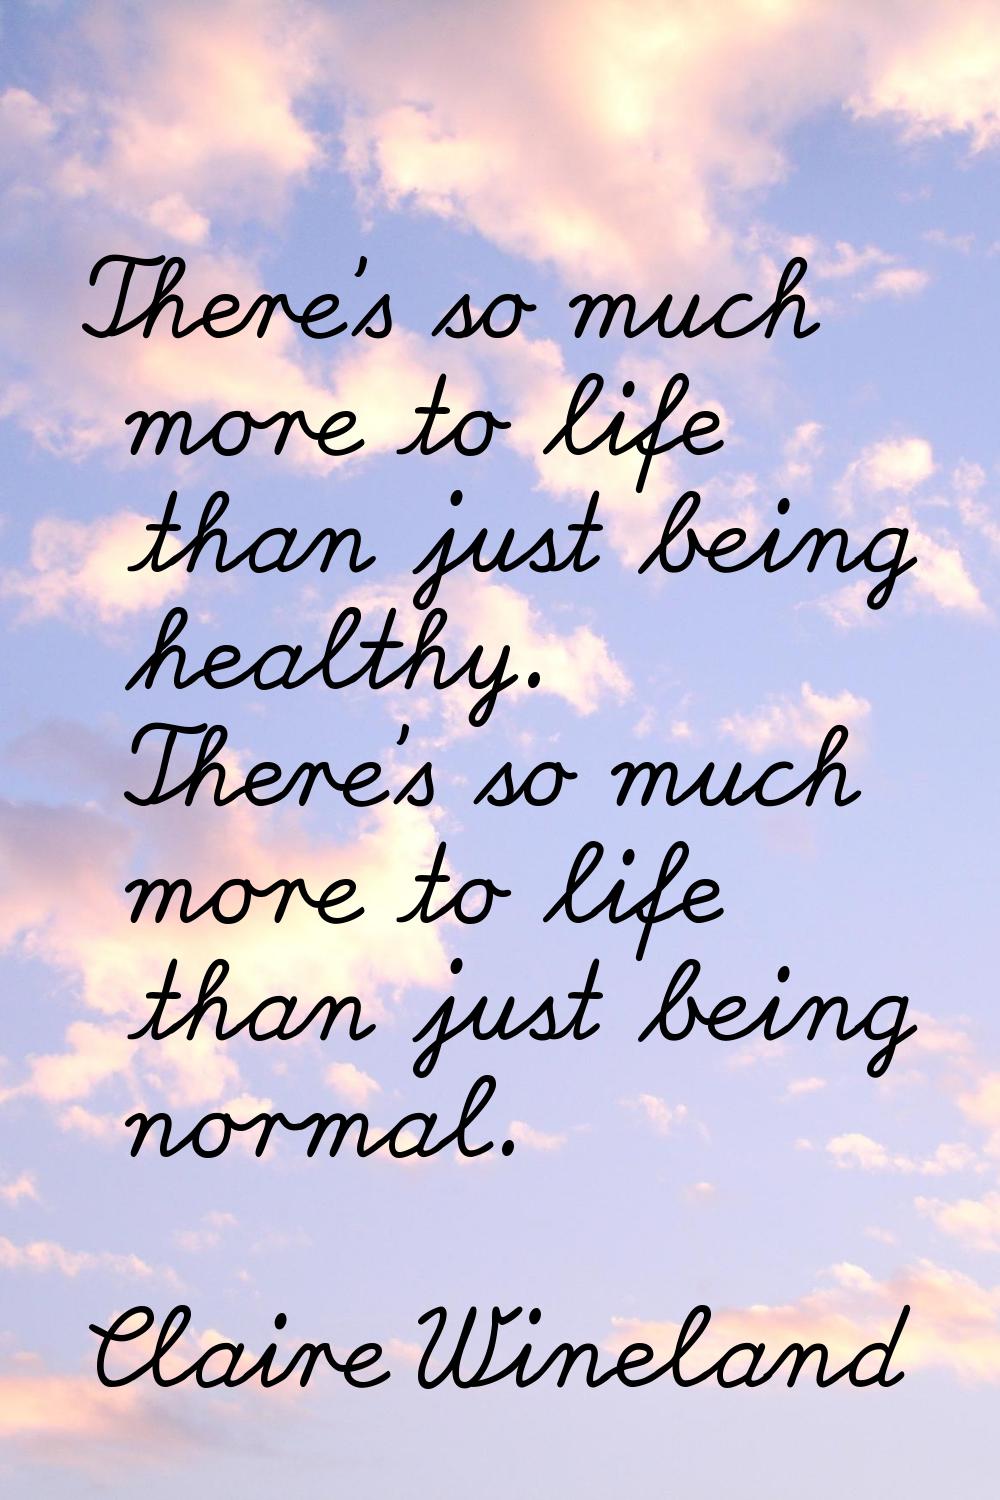 There's so much more to life than just being healthy. There's so much more to life than just being 